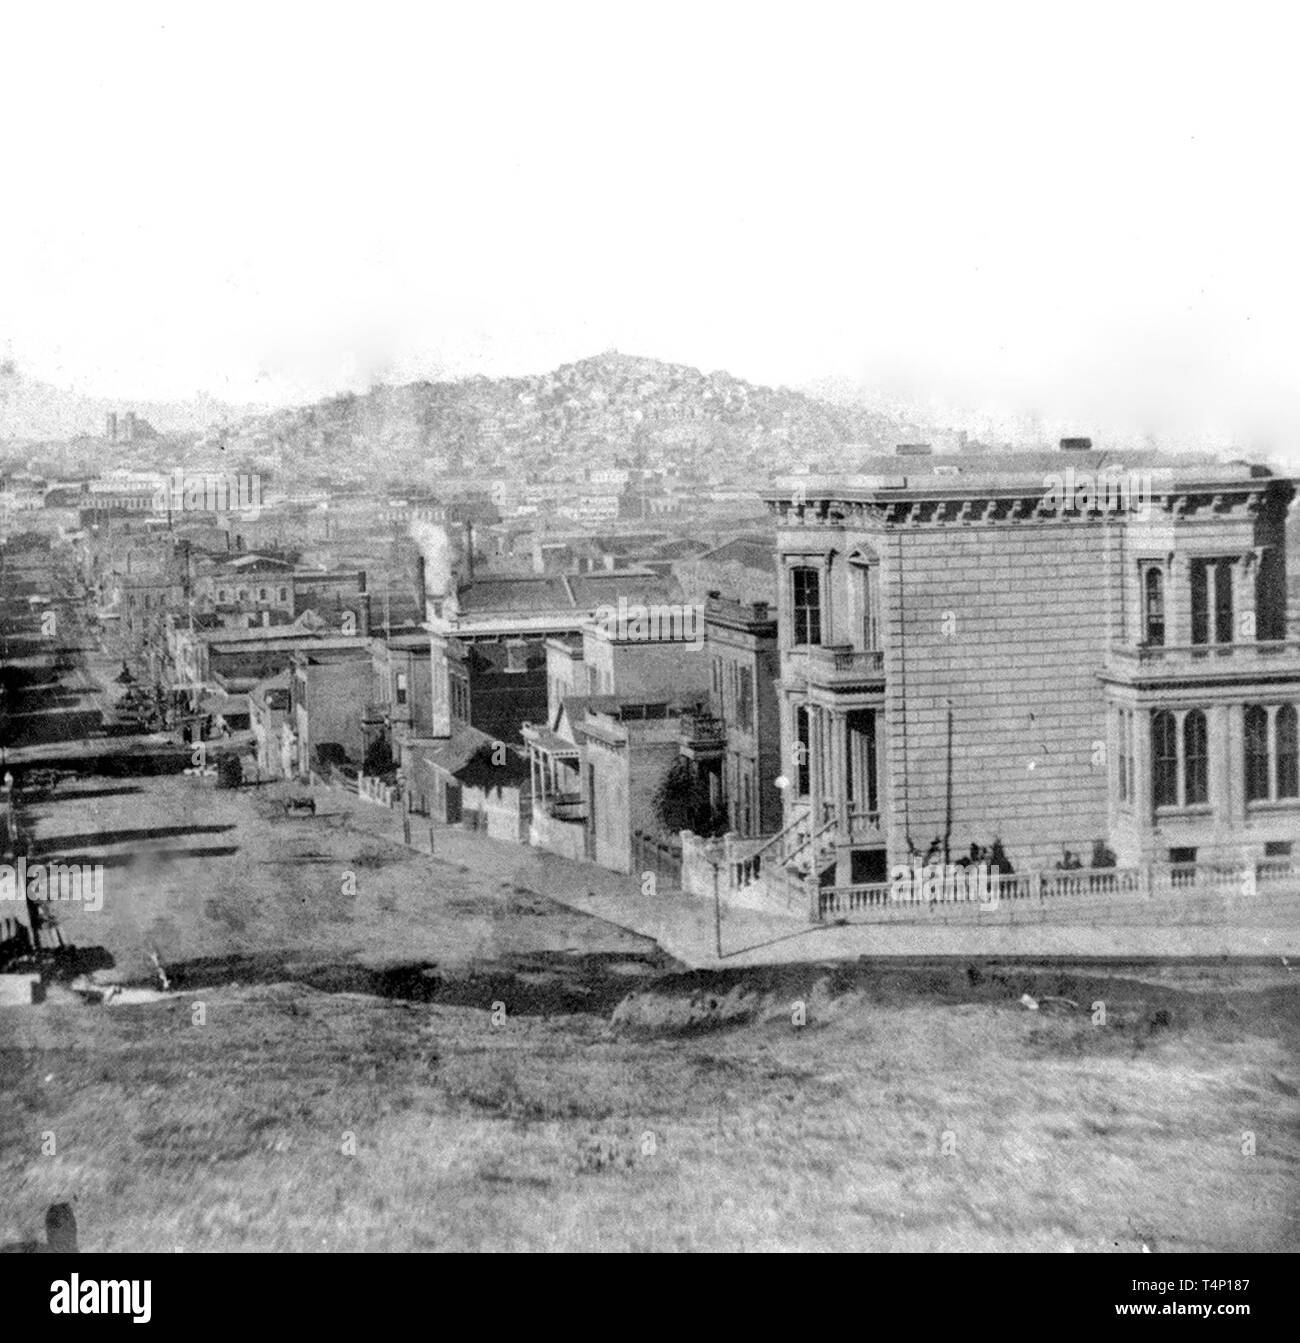 California History - First Street, San Francisco, looking North--Telegraph Hill in the distance ca. 1866 Stock Photo